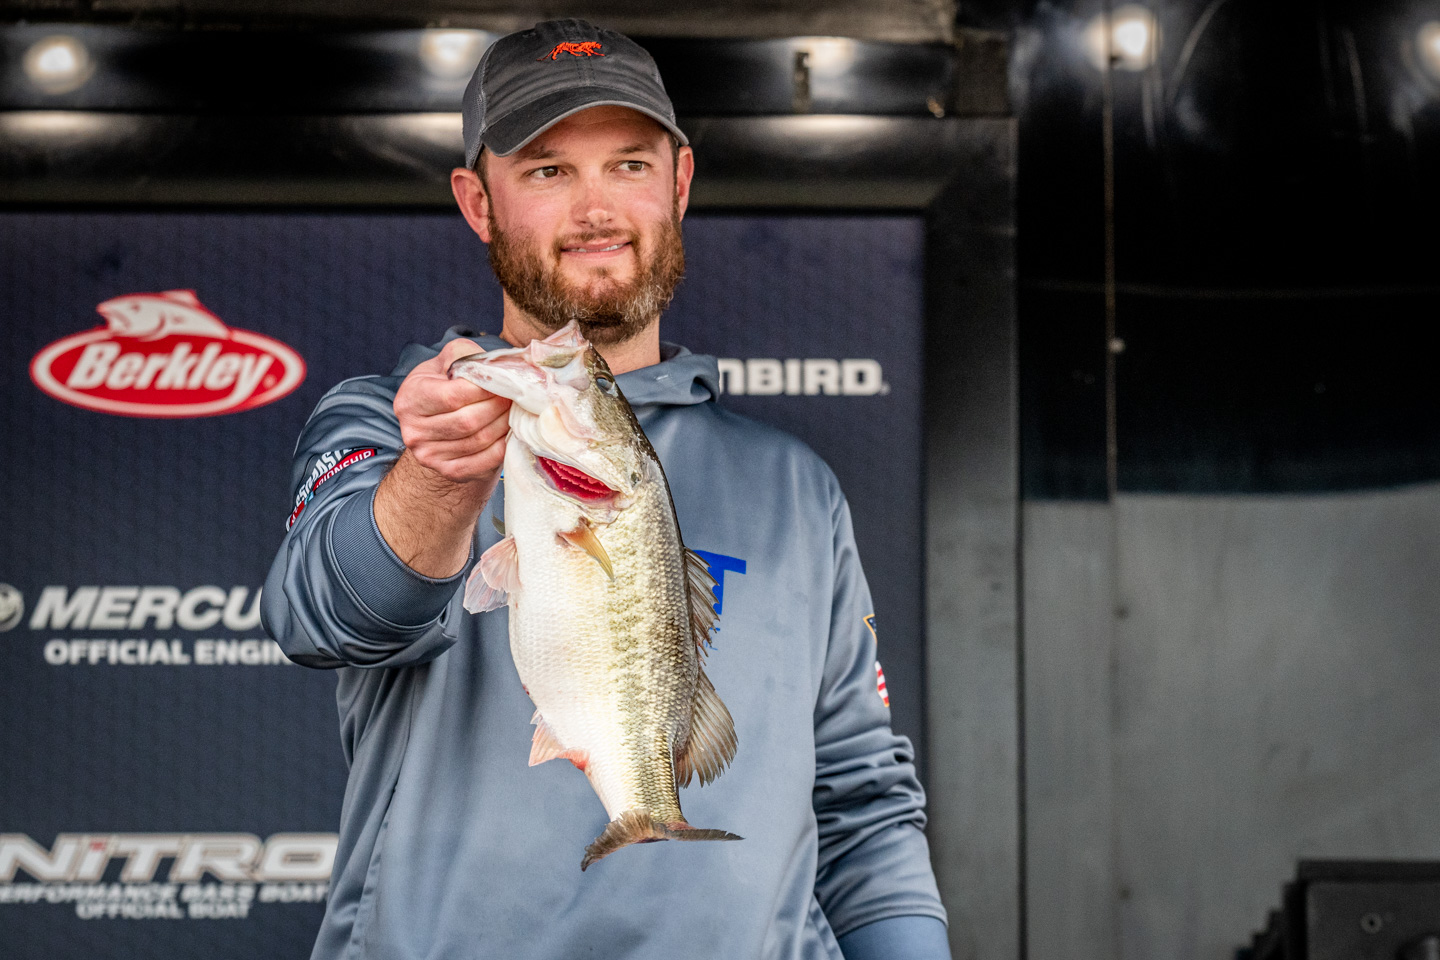 Powell powers to the top on Day 1 Classic Fish-Off